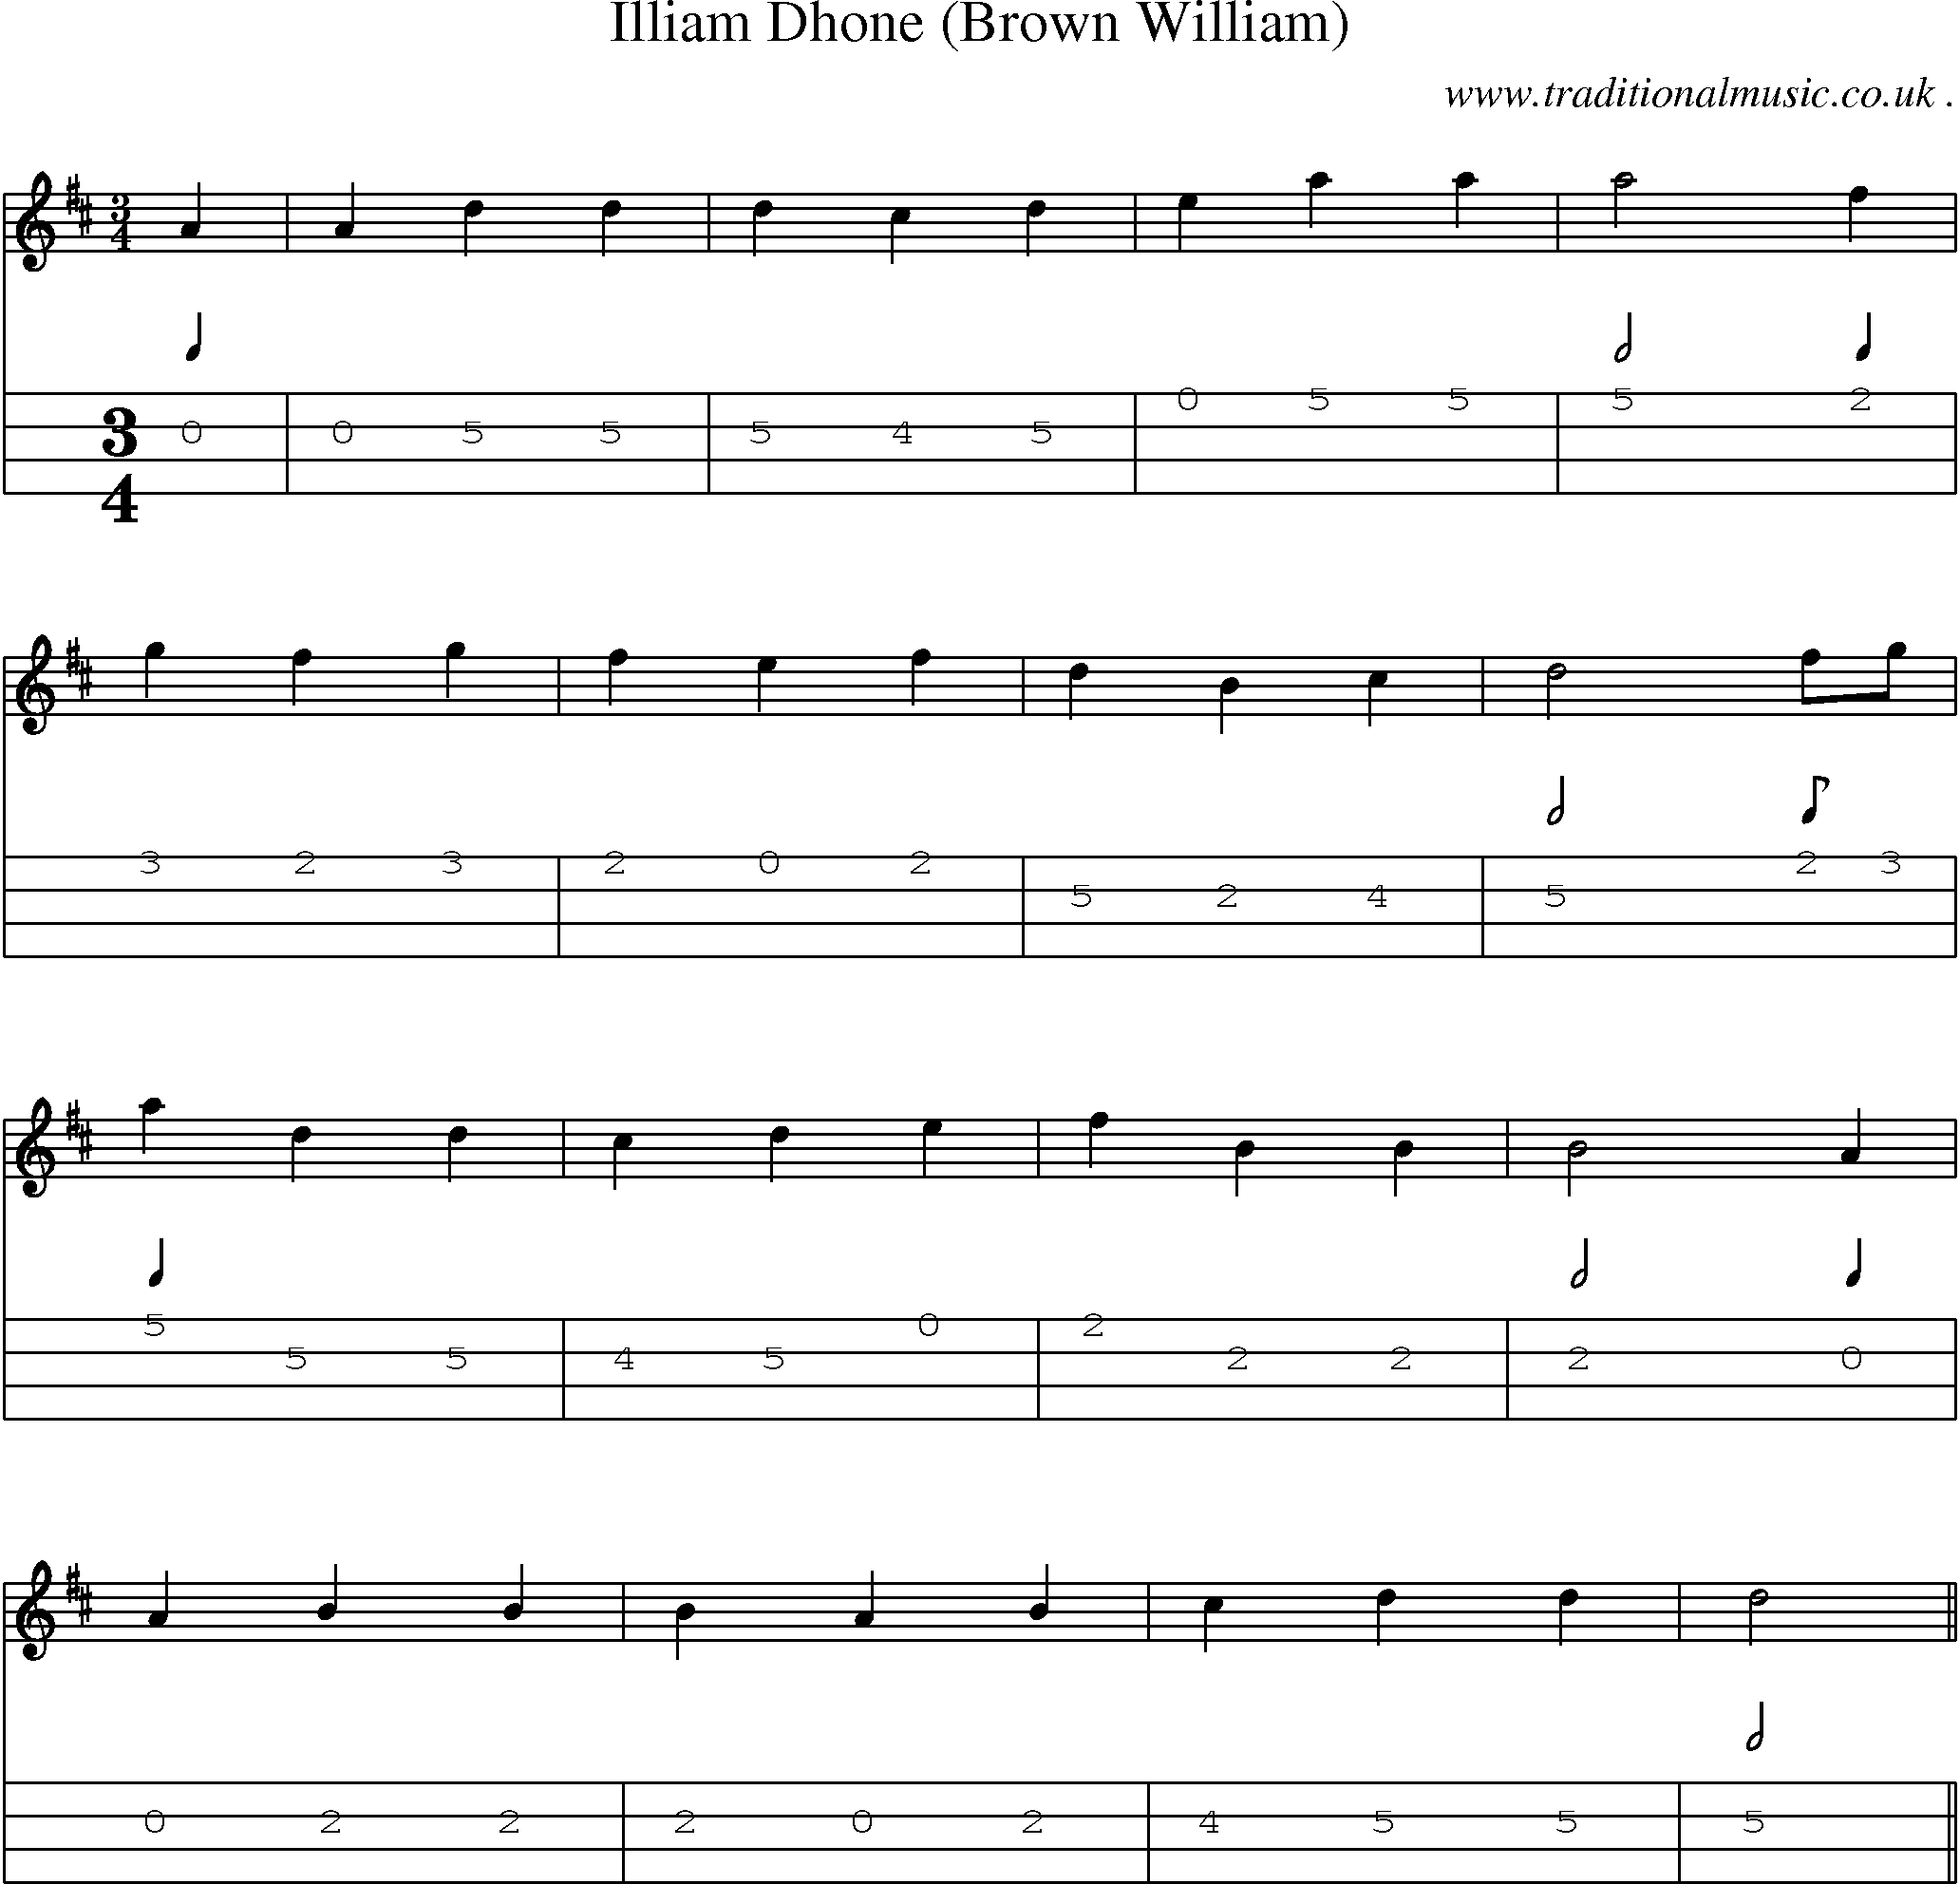 Sheet-Music and Mandolin Tabs for Illiam Dhone (brown William)